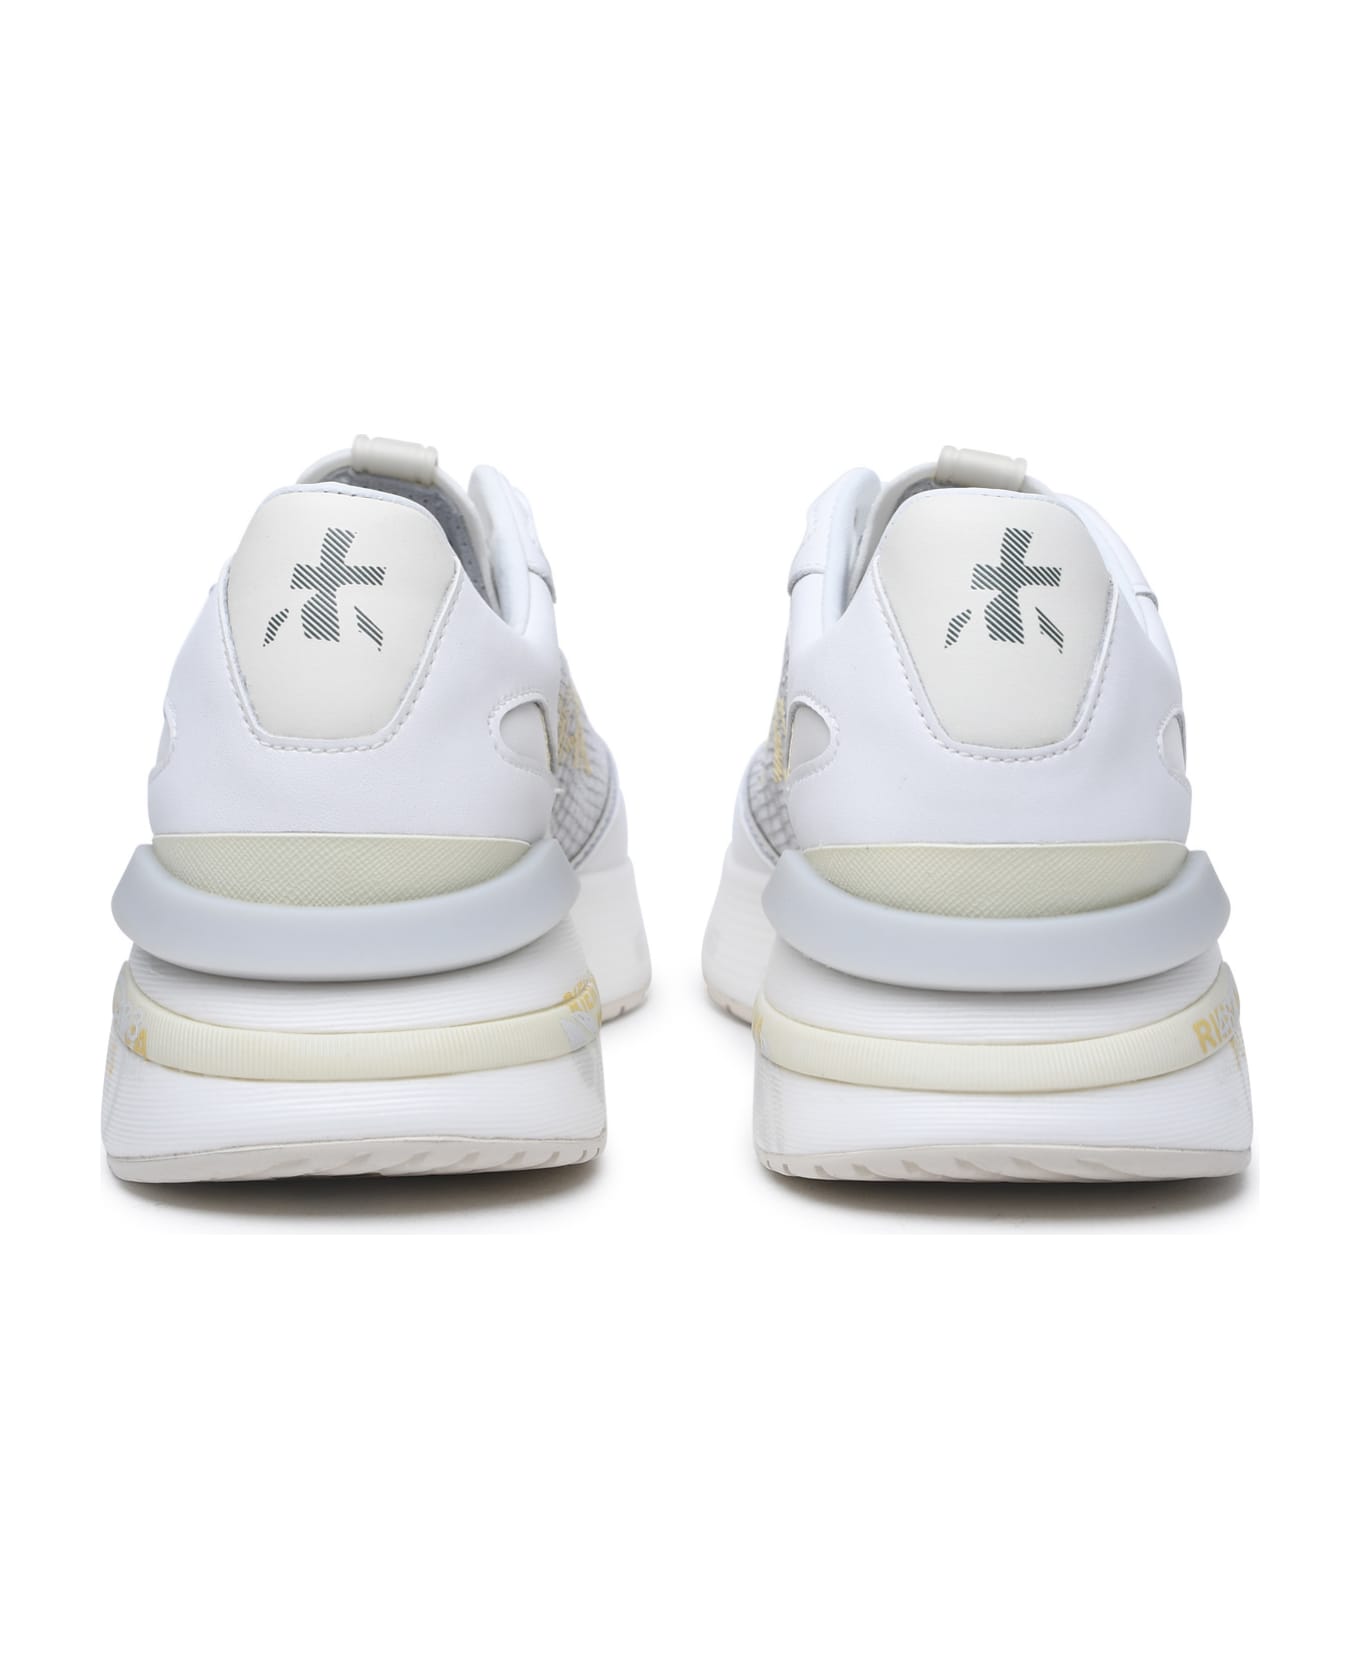 Premiata 'moerund' Sneakers In Leather And White Fabric - White スニーカー